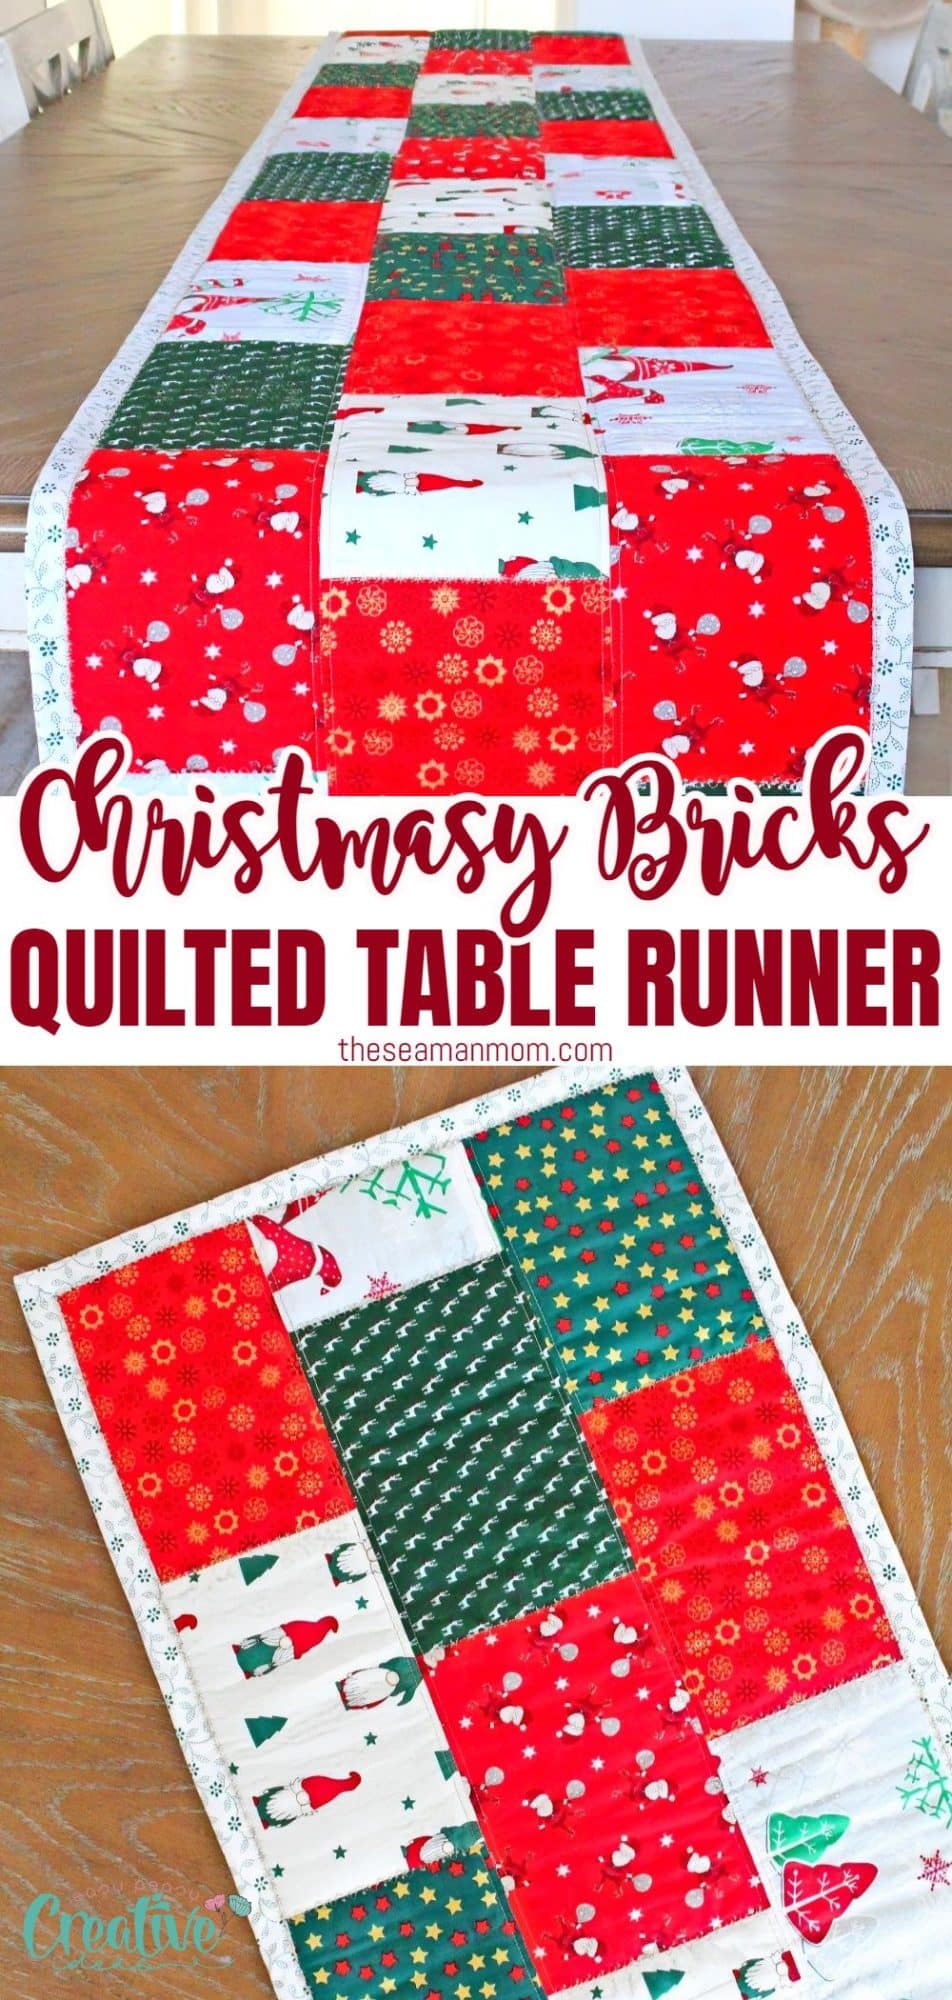 Quilted Christmas table runner on a brown table